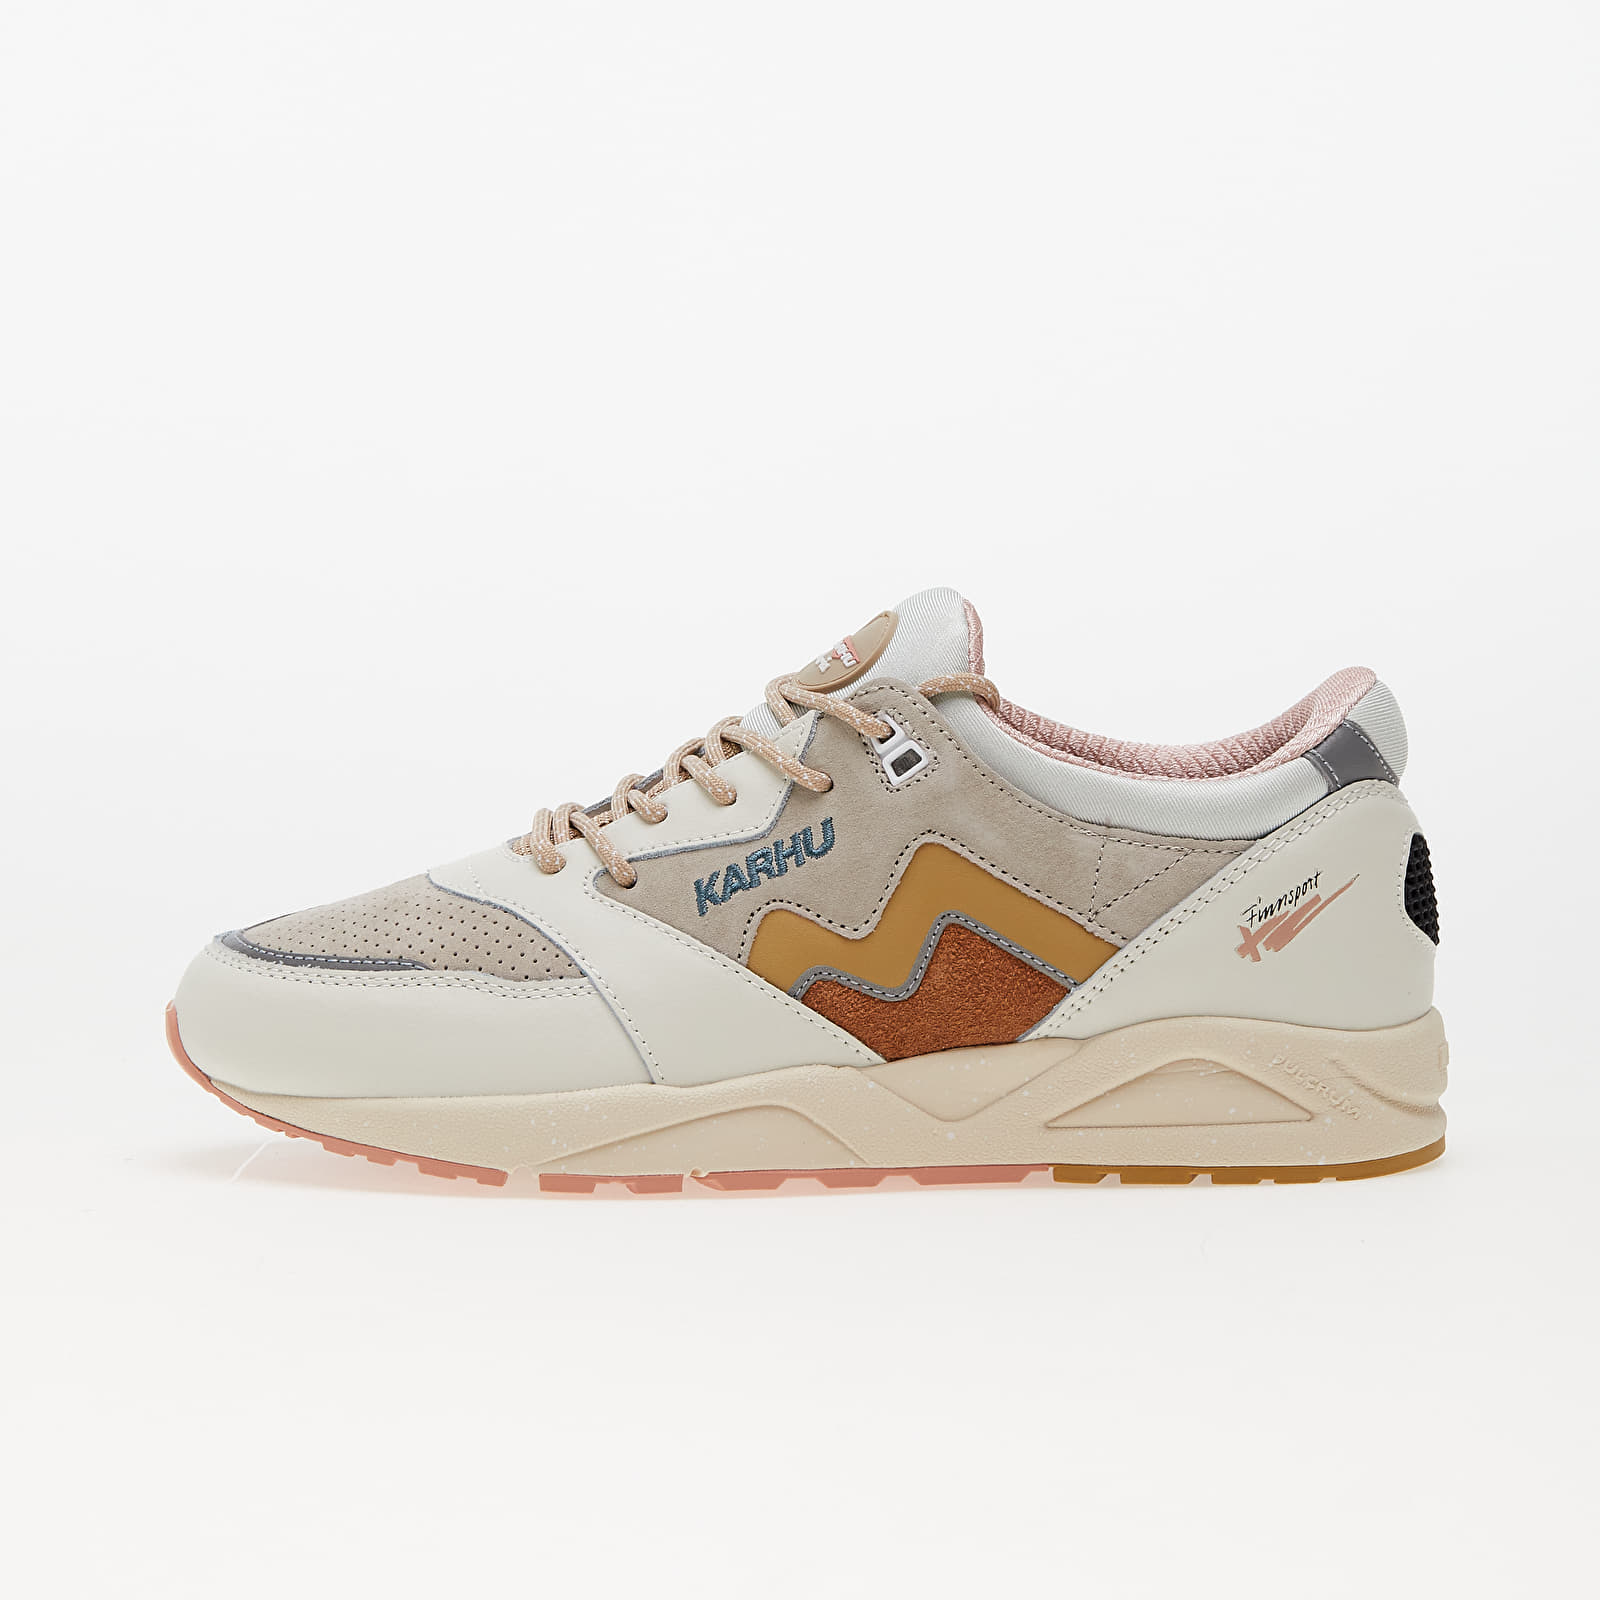 Men's shoes Karhu Aria 95 Lilly White/ Curry